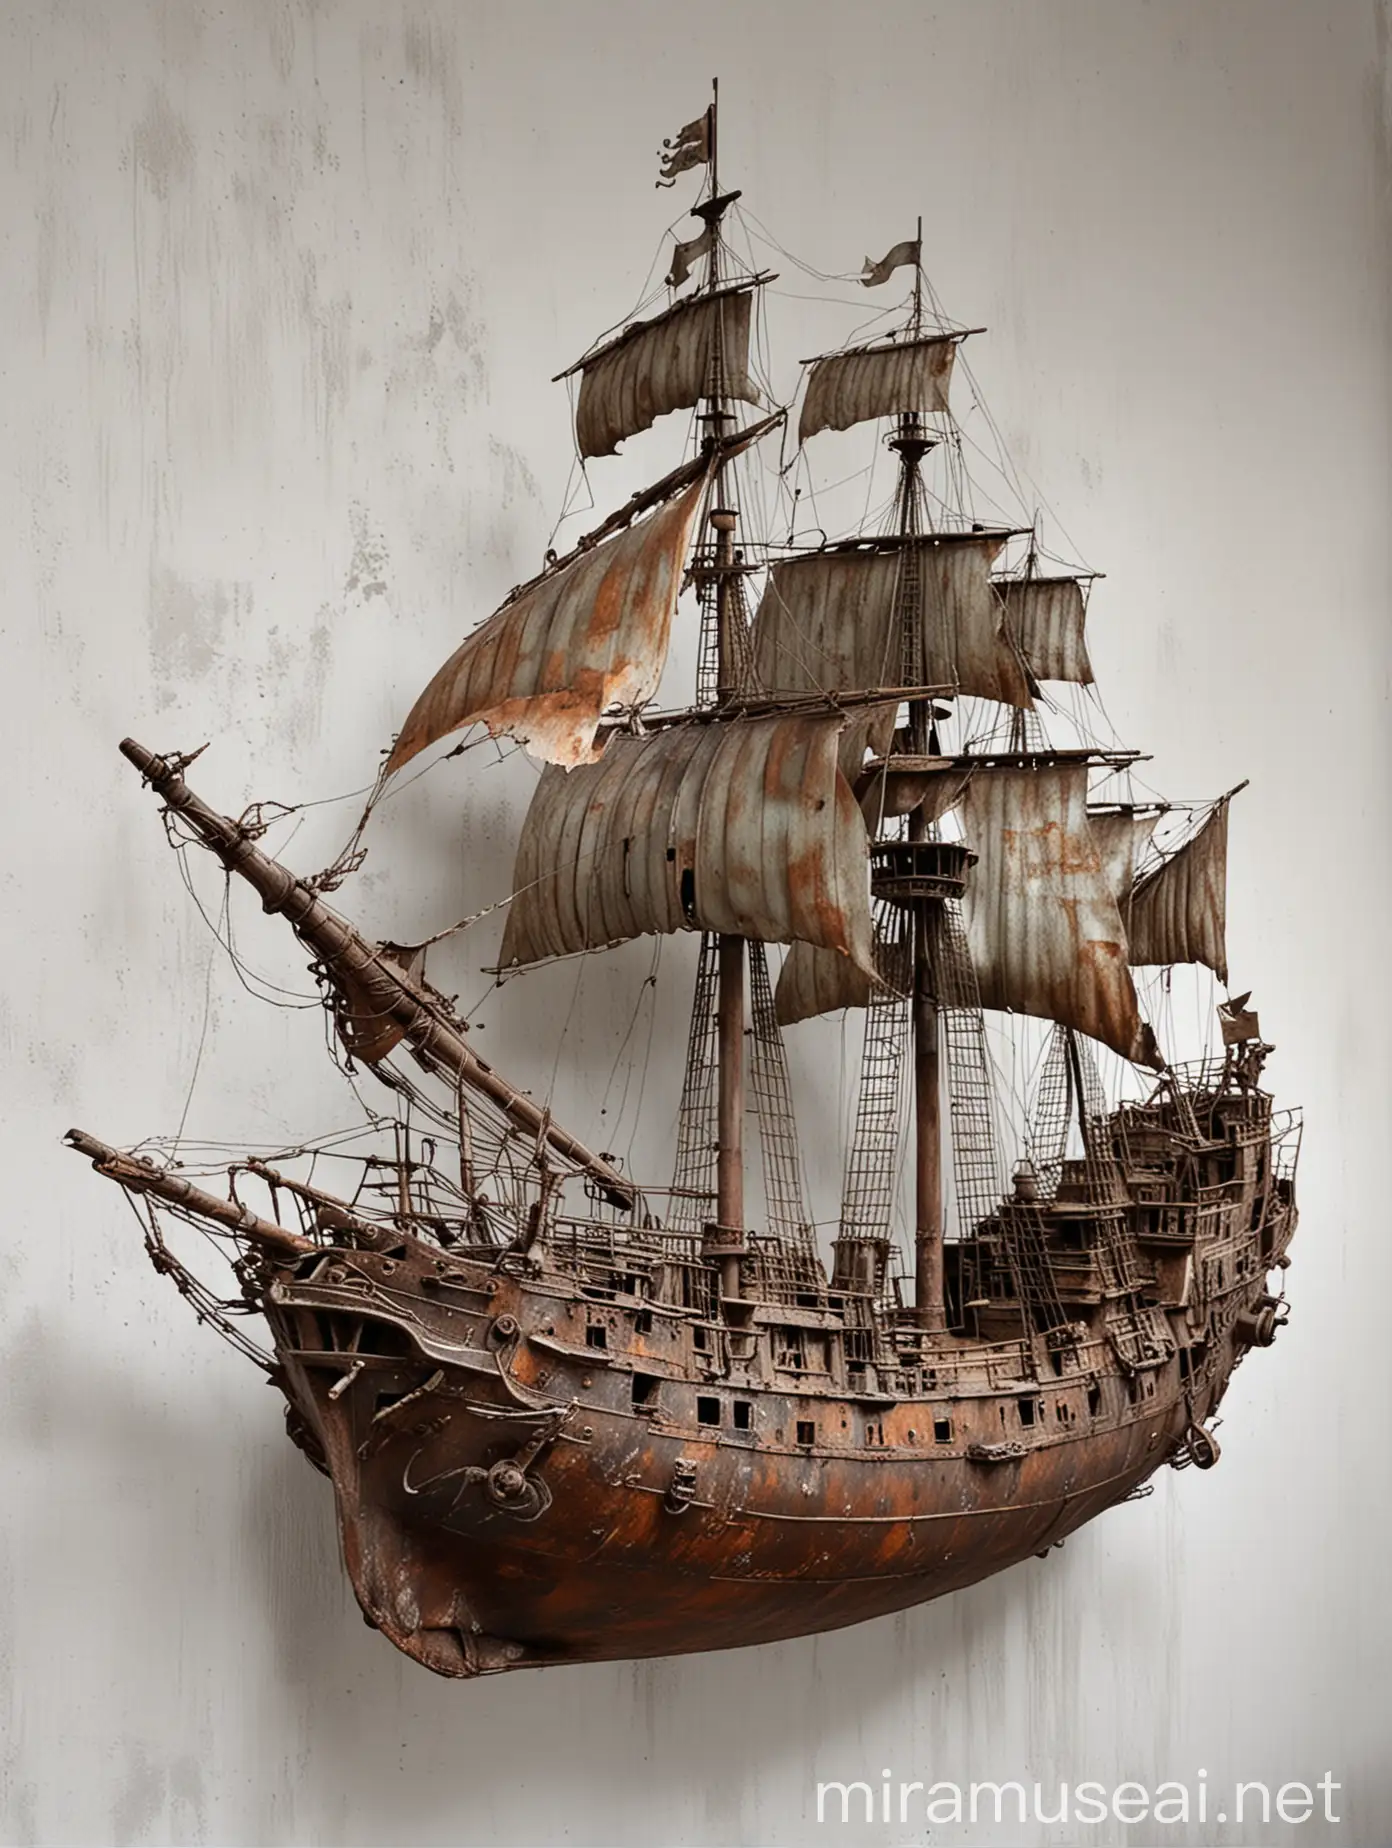 I want a wall sculpture of an authentic ship, in a bit of rusted metal, silver, very artistic on a white wall of an office. Want picture to be realistic. This ship can be gathered in pieces and a bit abstracted